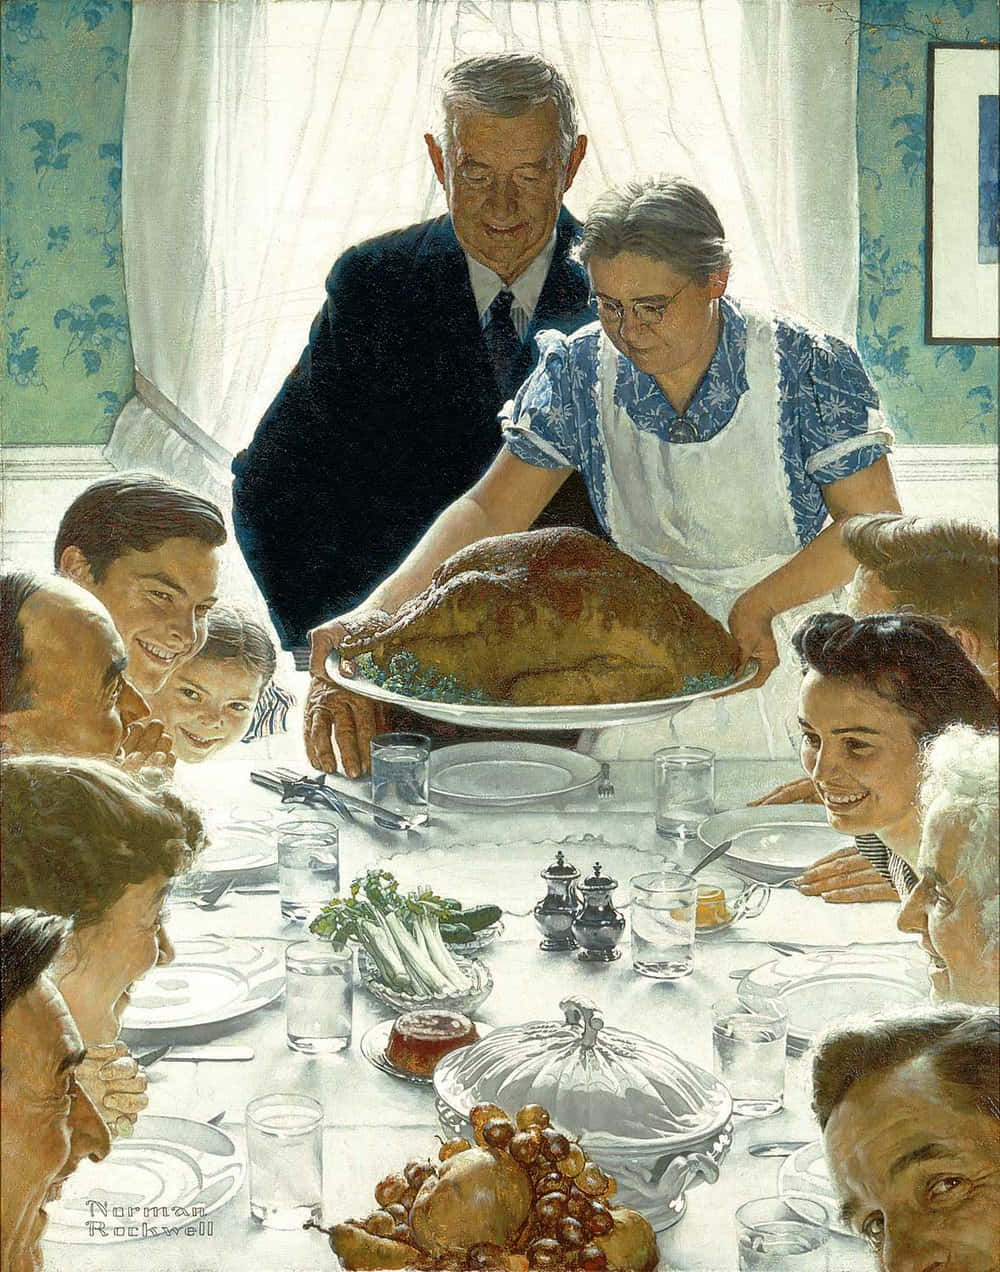 "My Best Self" by Norman Rockwell